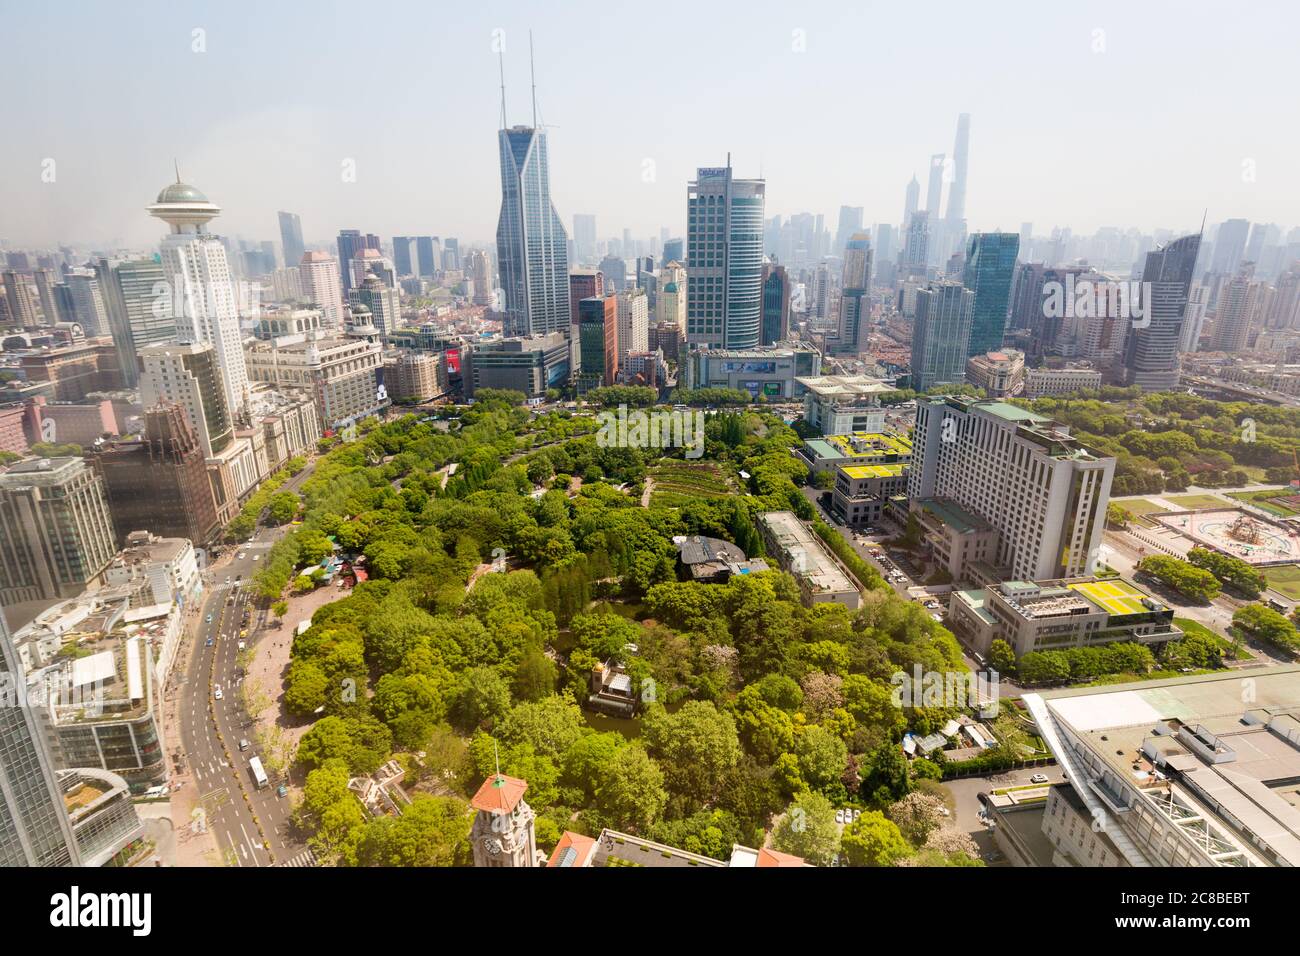 Shanghai, China - April 17, 2018: High angle view on the People's Square. Skyscrapers in the background. Stock Photo